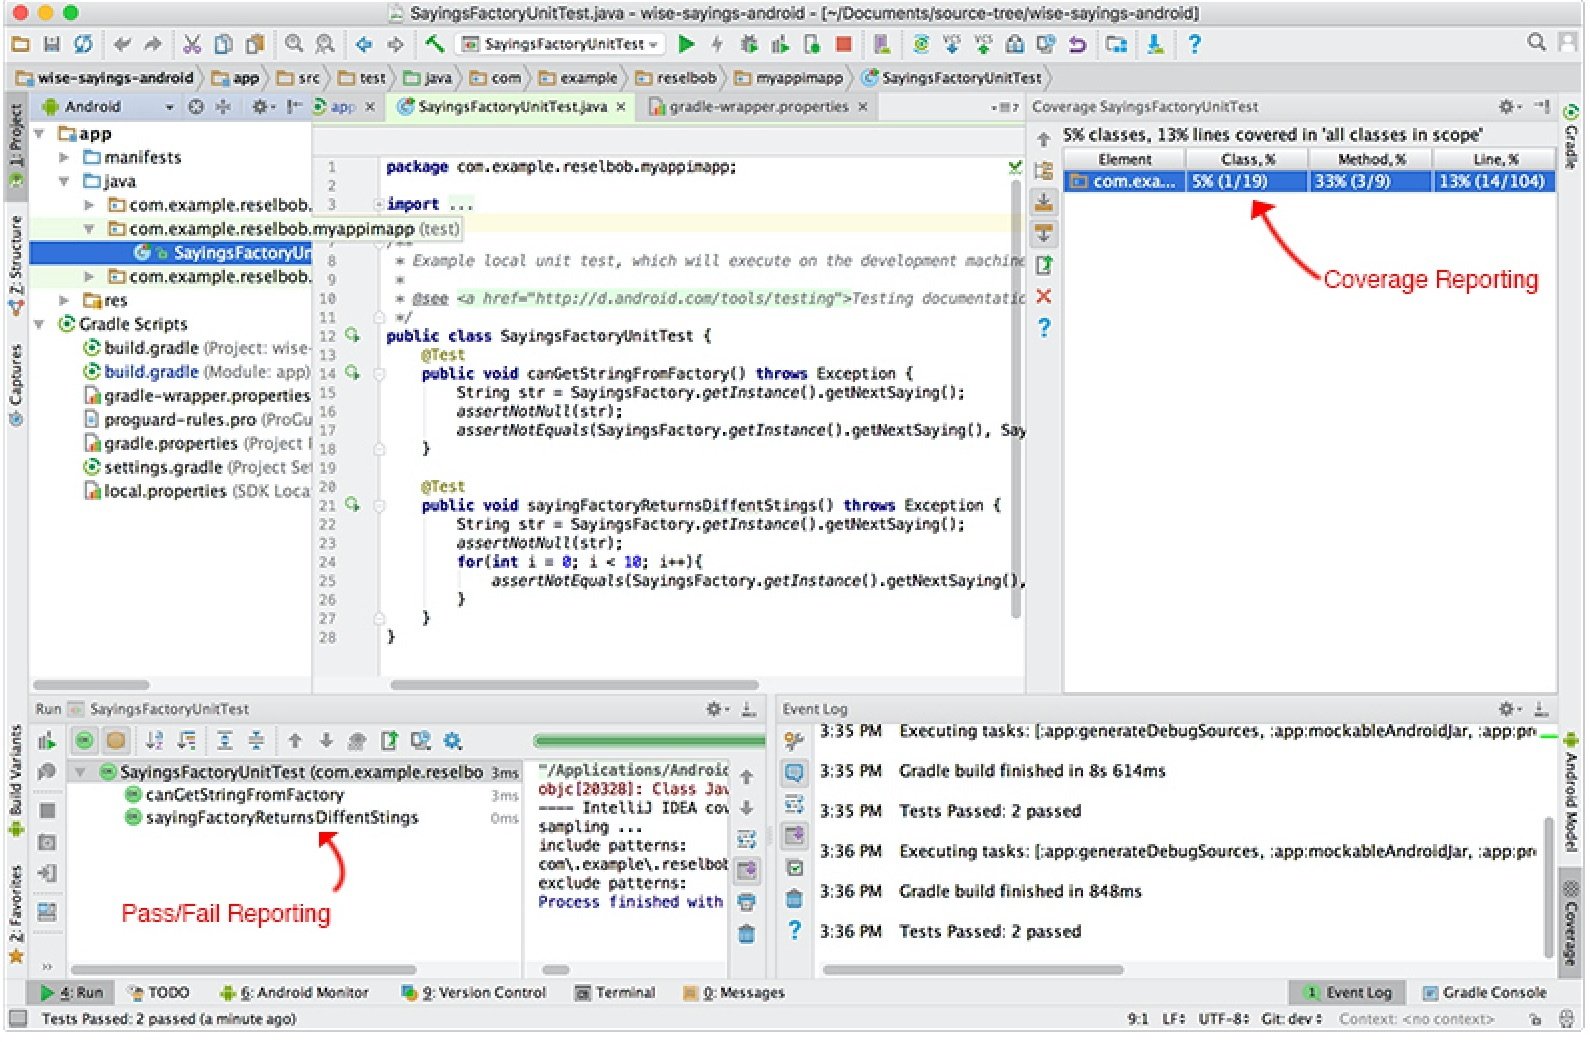 A screenshot showing the code coverage capabilities of unit testing under Android Studio.